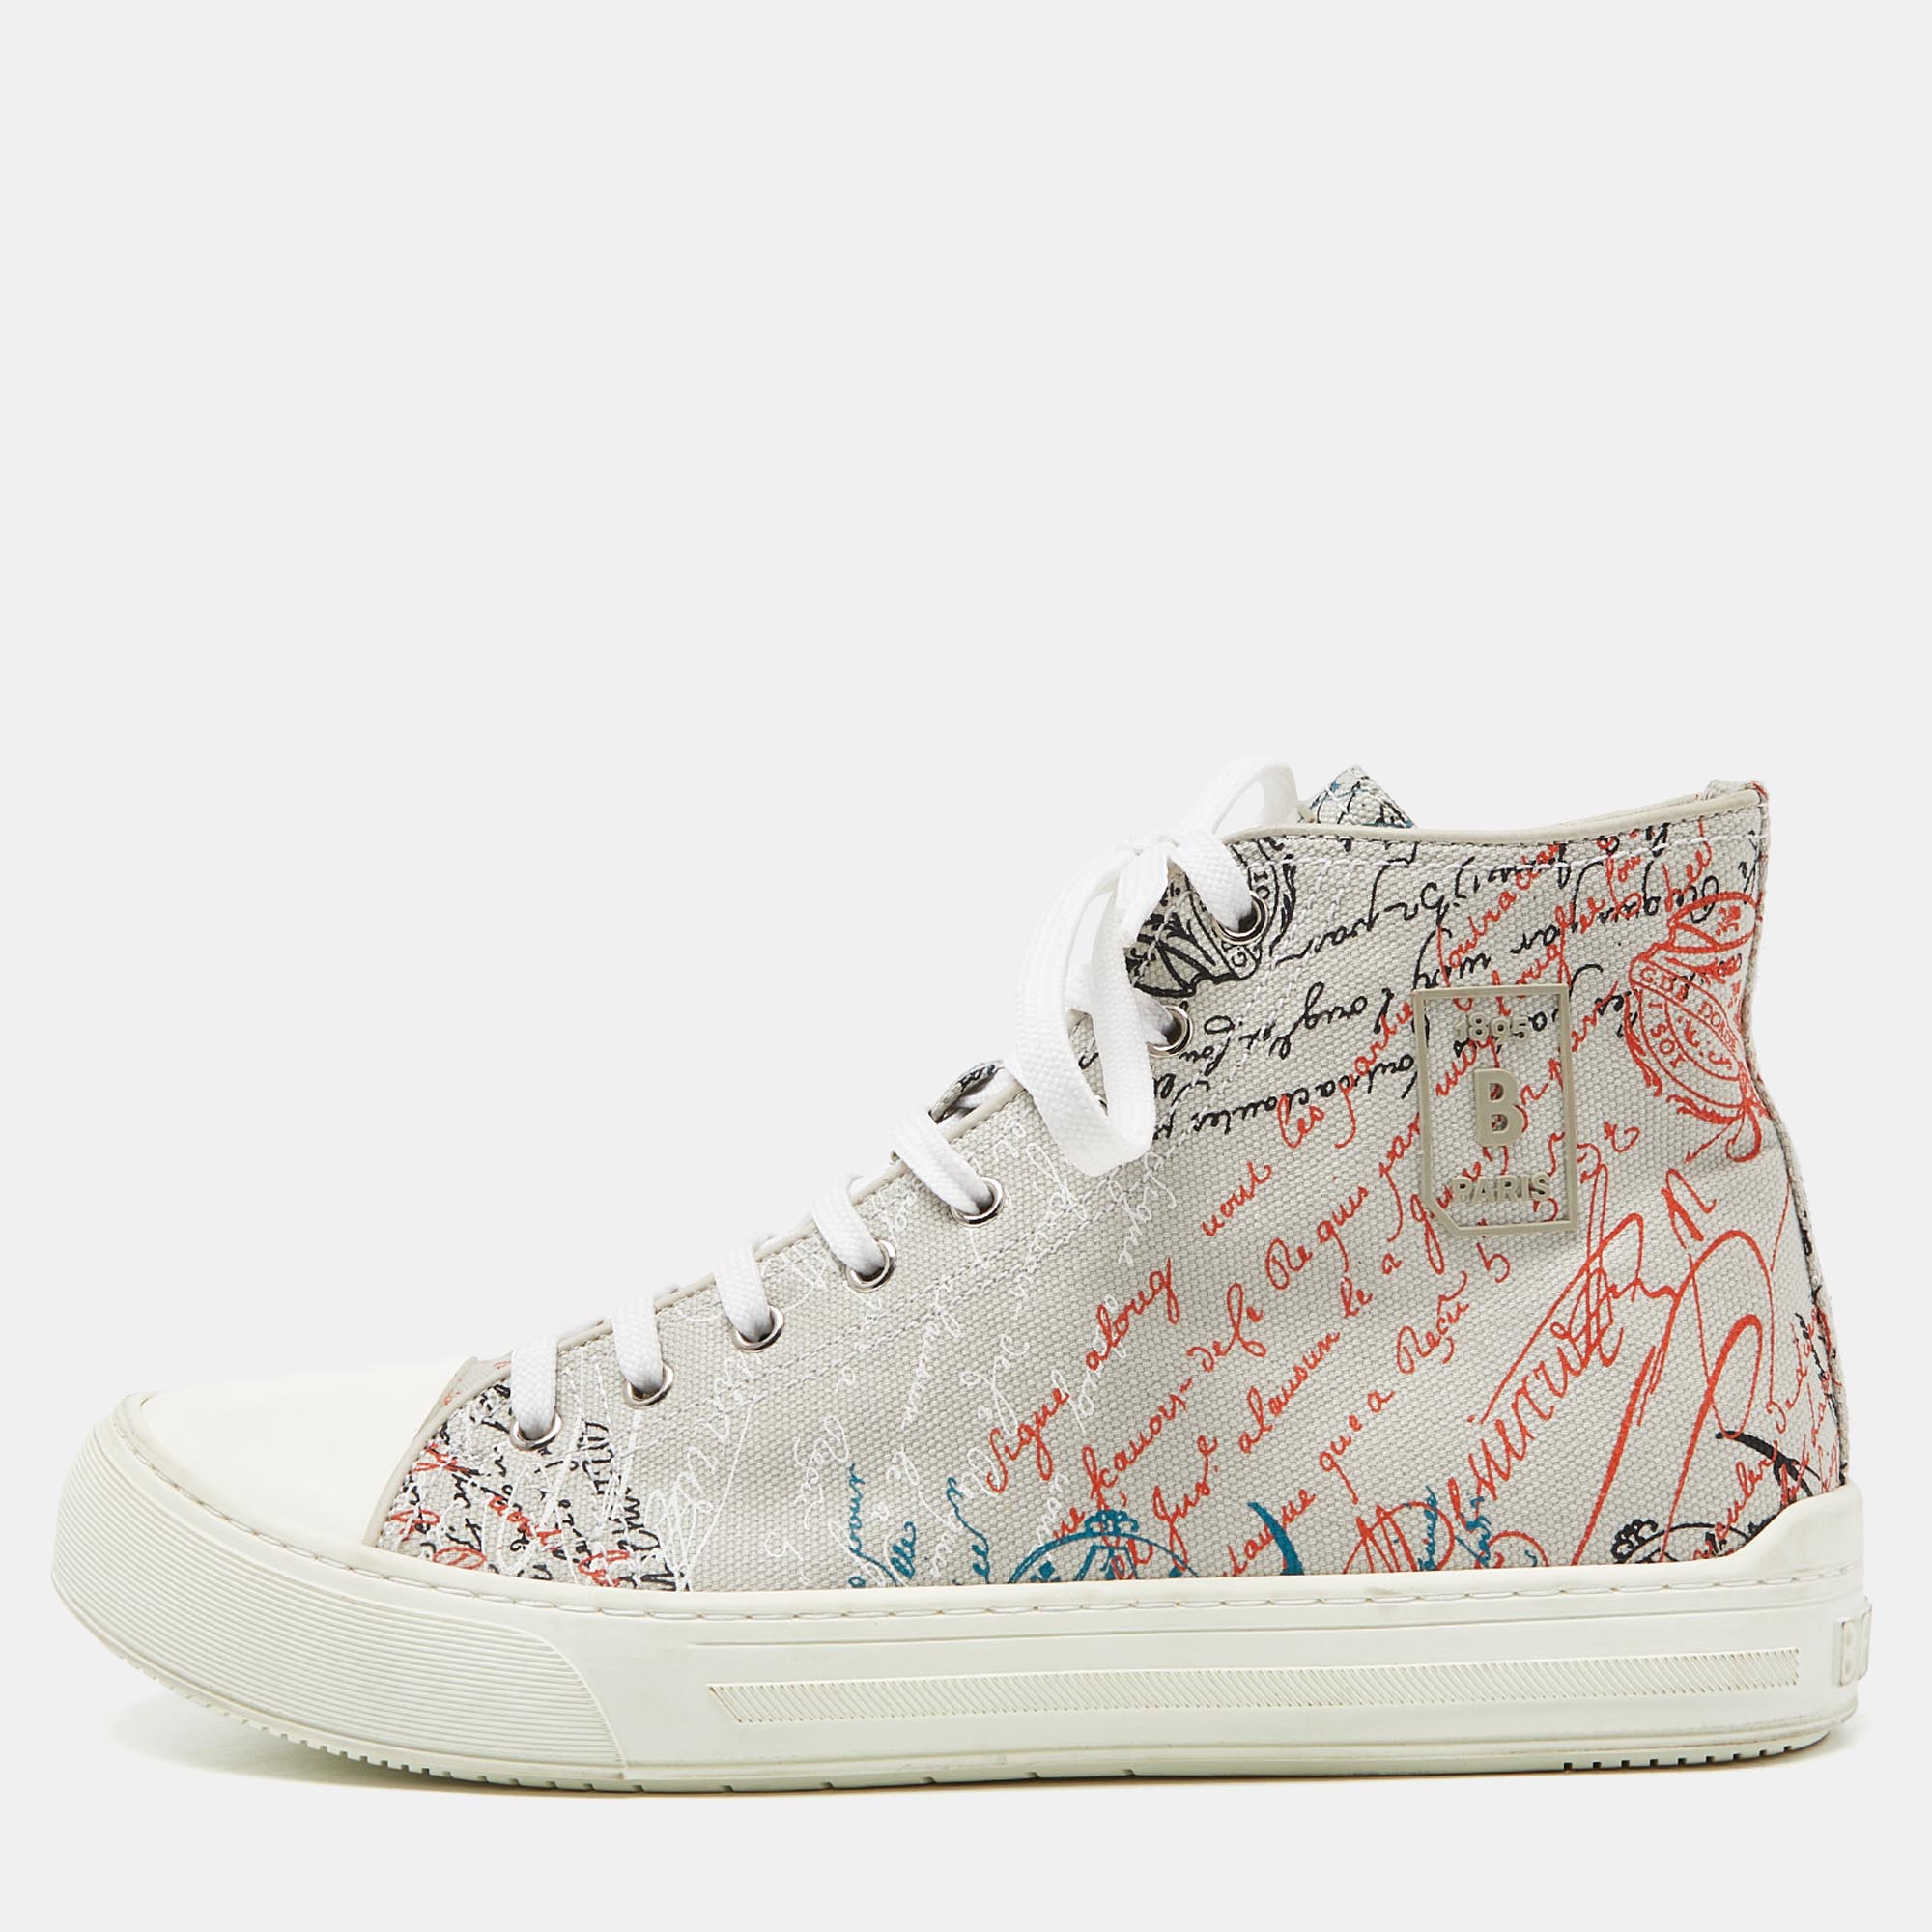 Berluti grey calligraphy canvas high top sneakers size 43.5